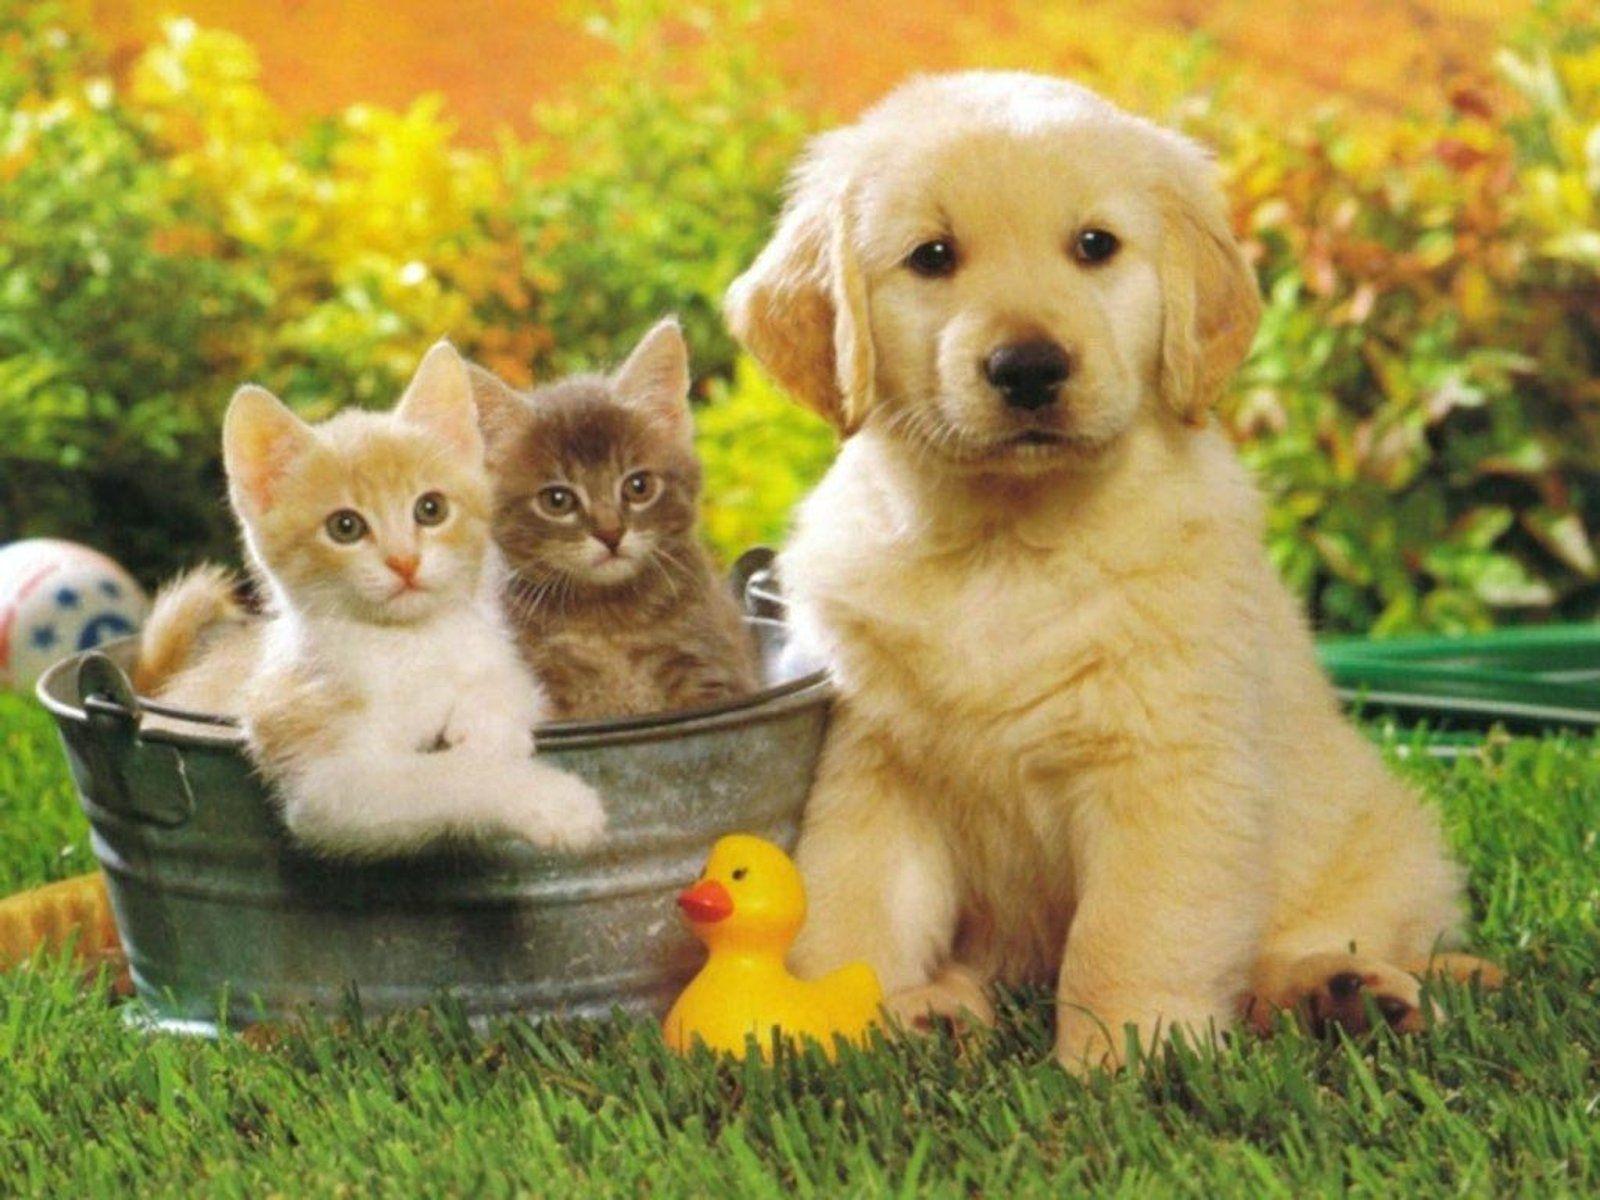 Kitten and Puppy Wallpaper Free Kitten and Puppy Background